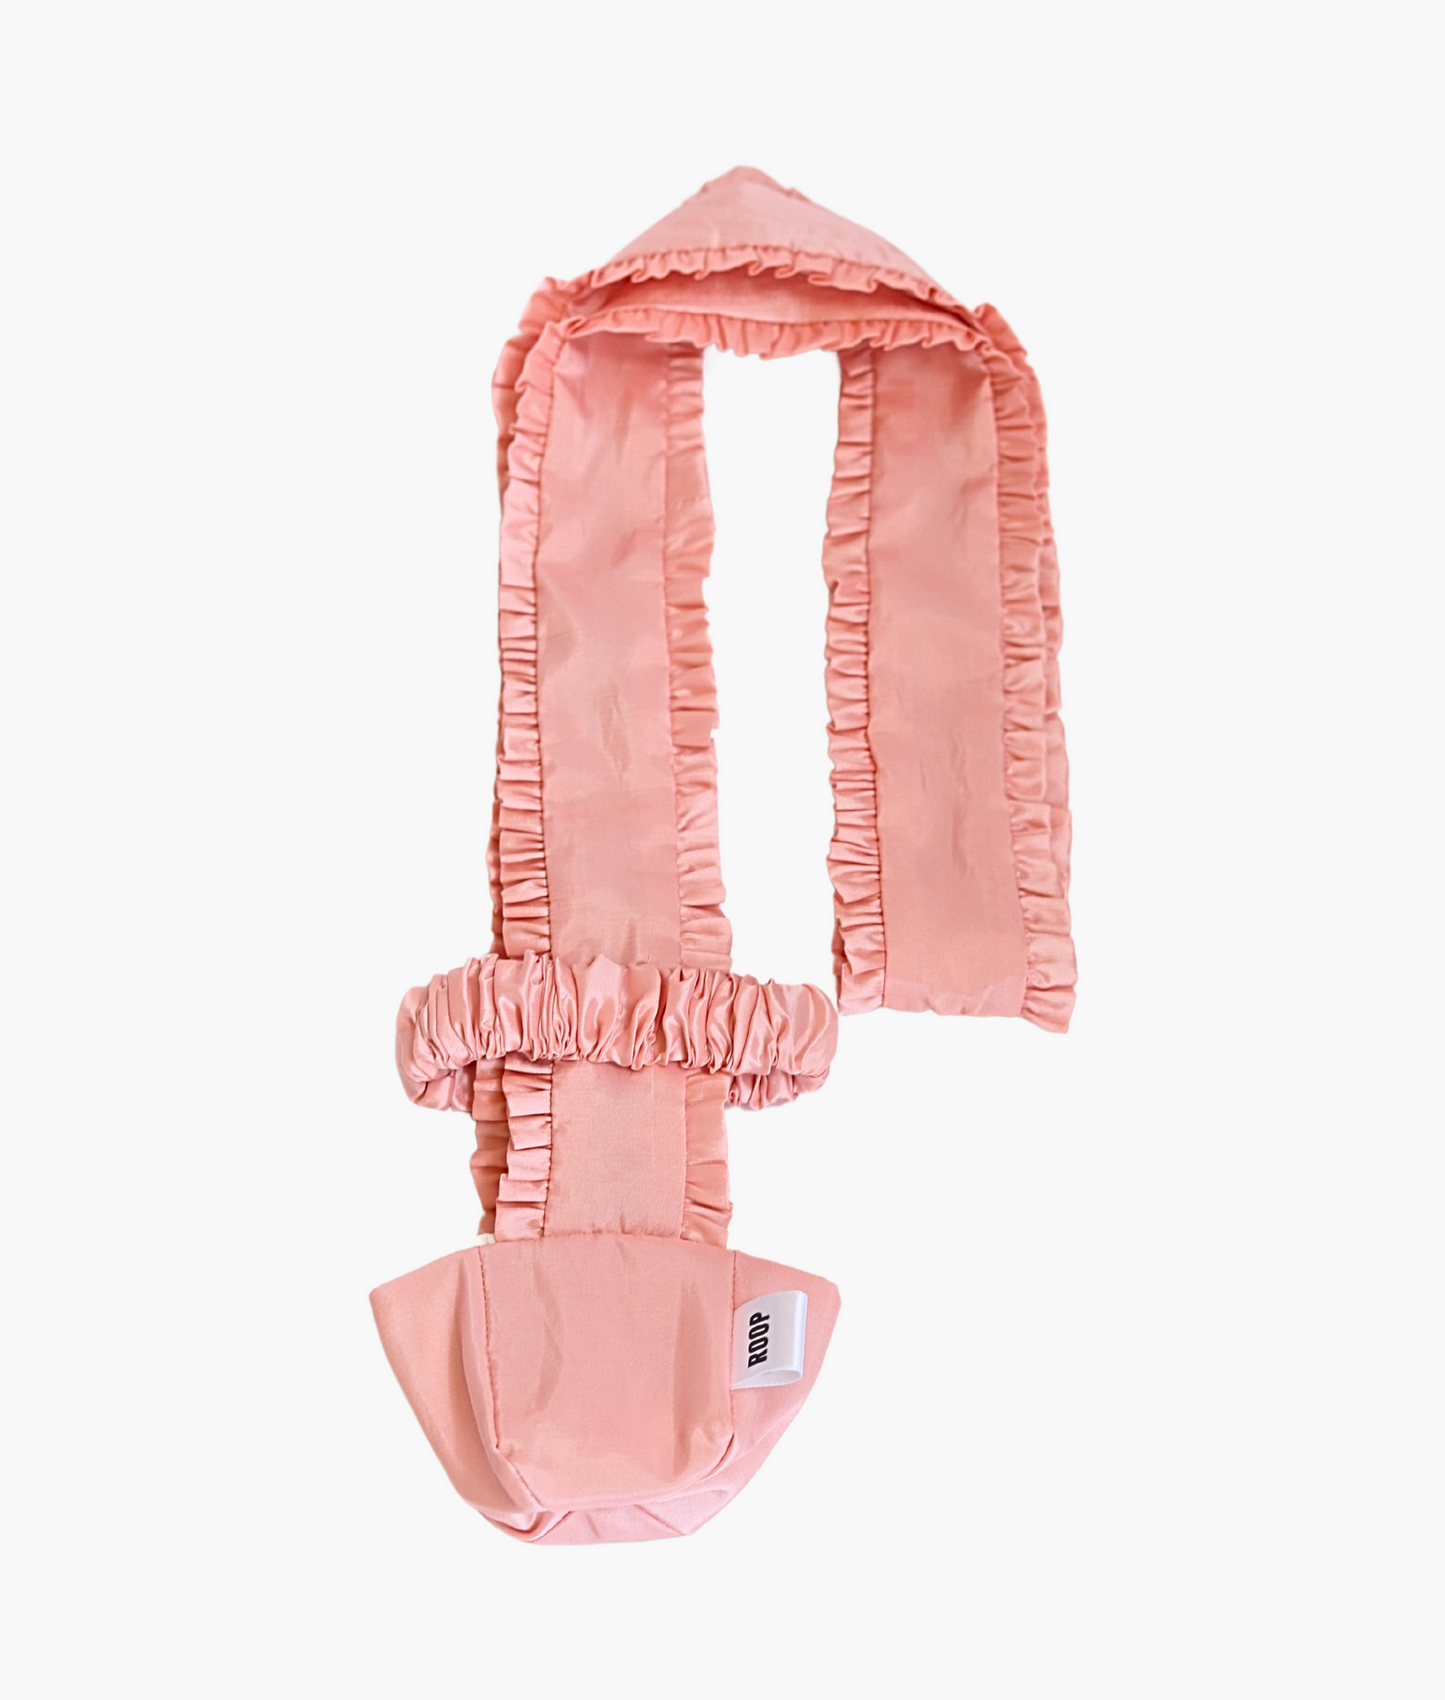 Crossbody bottle bag in pink with ruffles